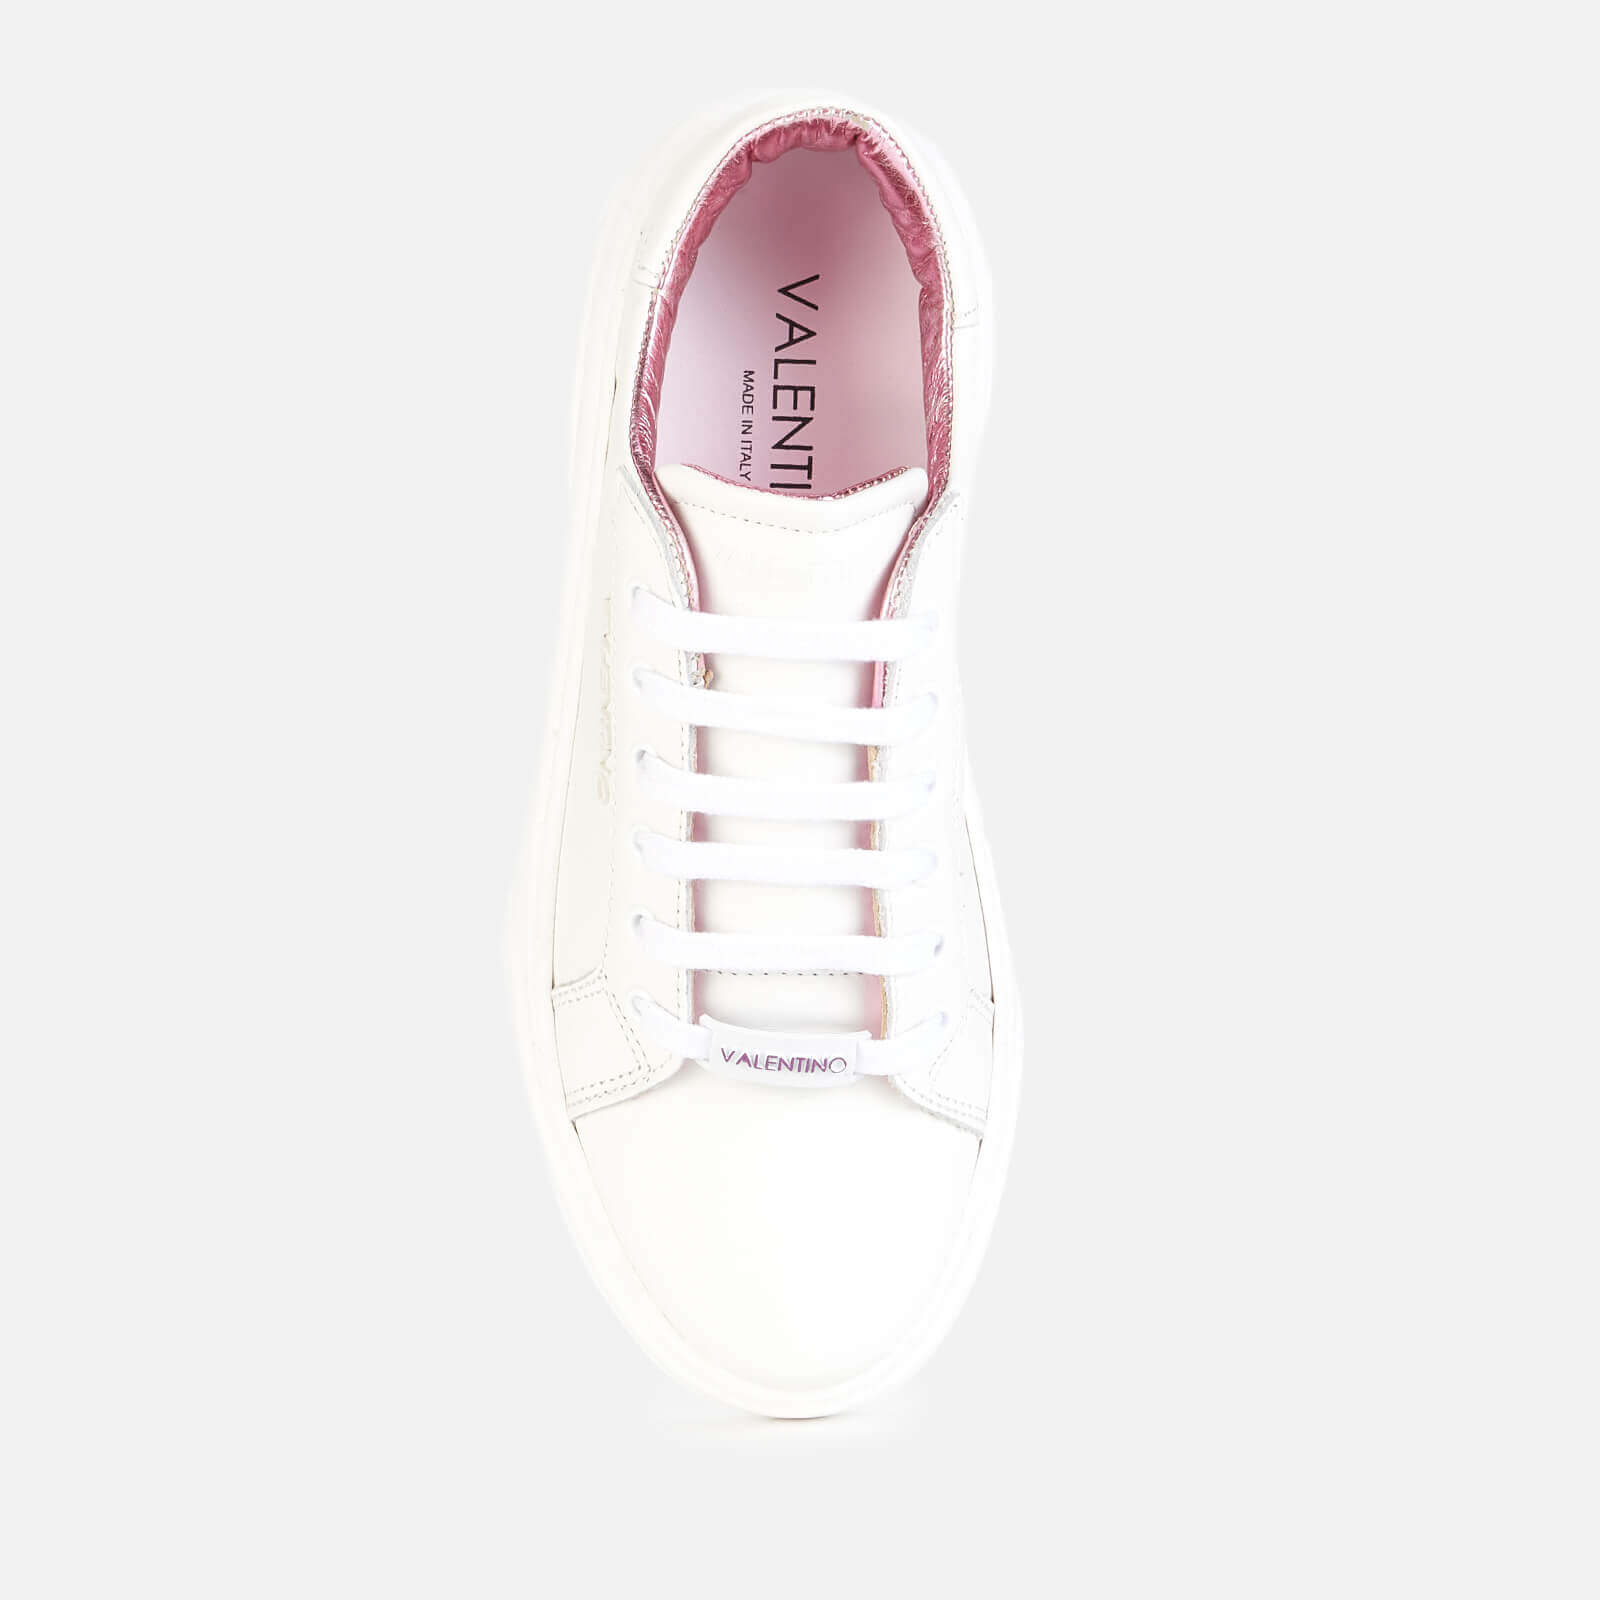 Valentino Shoes Women's Leather Flatform Trainers - White/purple - Uk 3 91190785 010 Mens Footwear, White